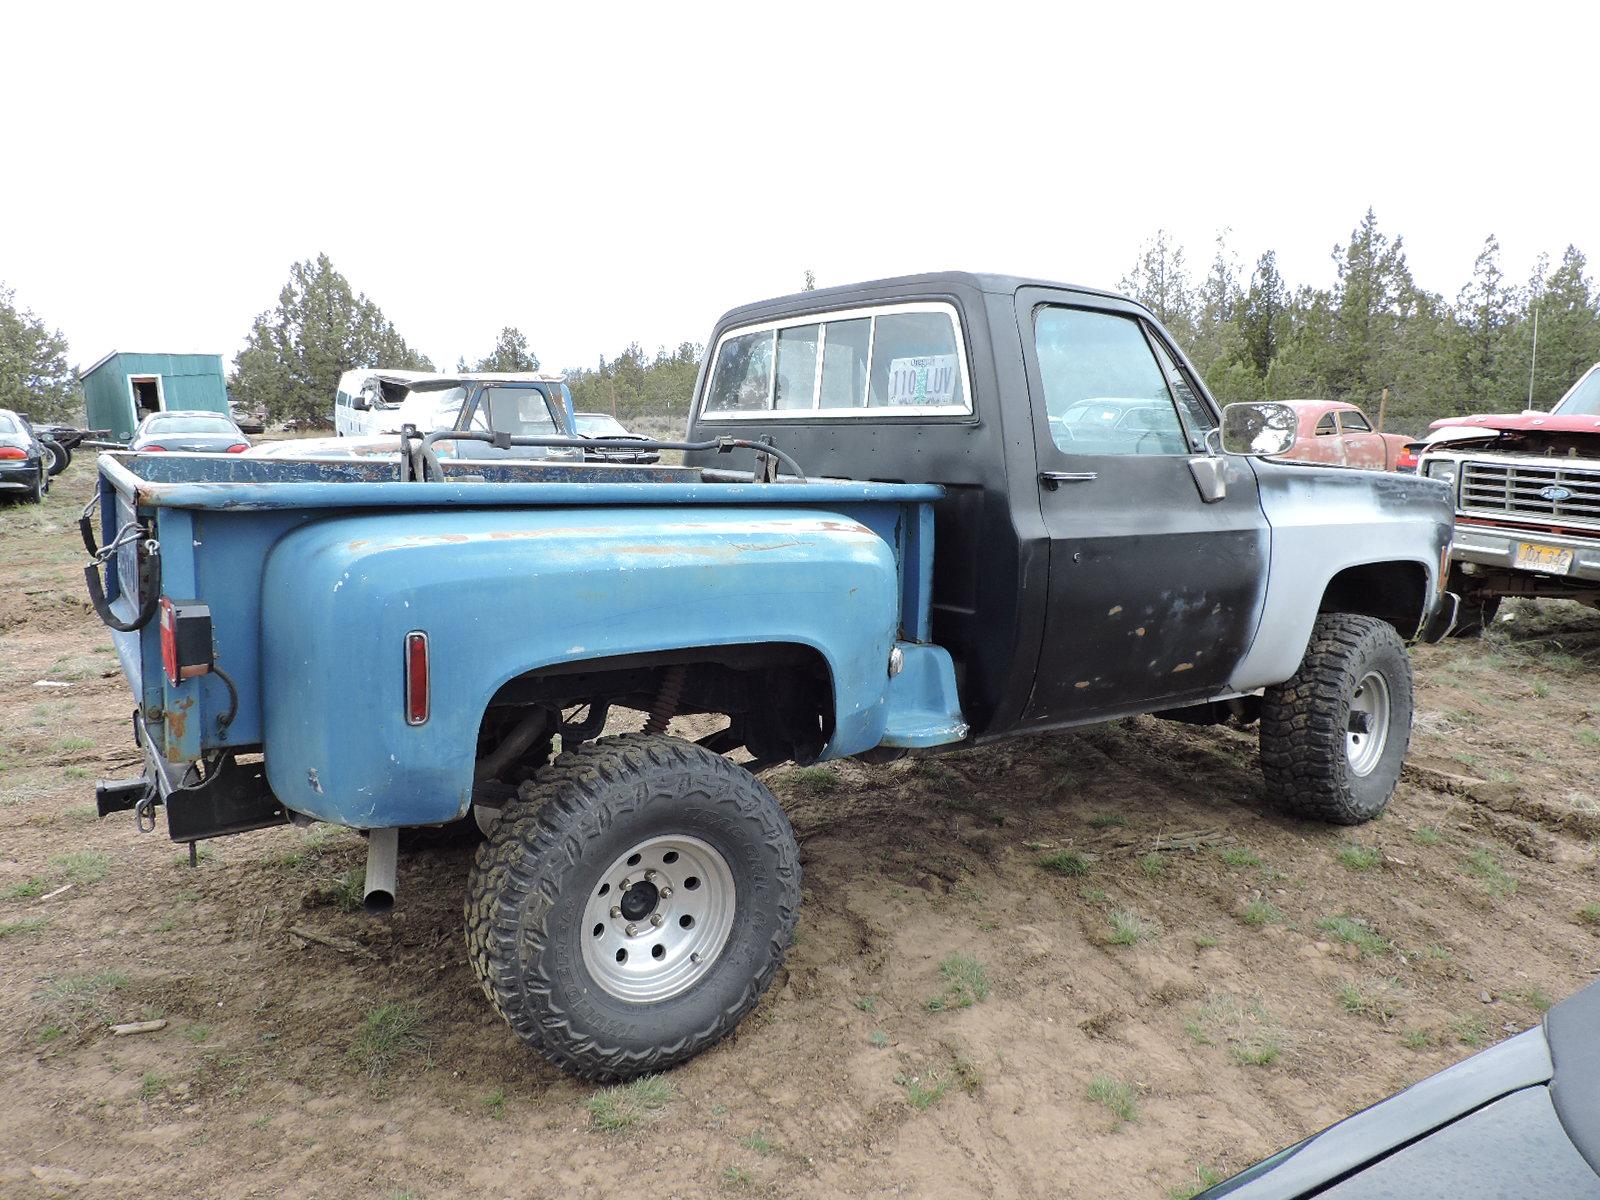 1976 Chevrolet Regular Cab Step-Side Pickup / 4X4 with 350 and 5-Speed